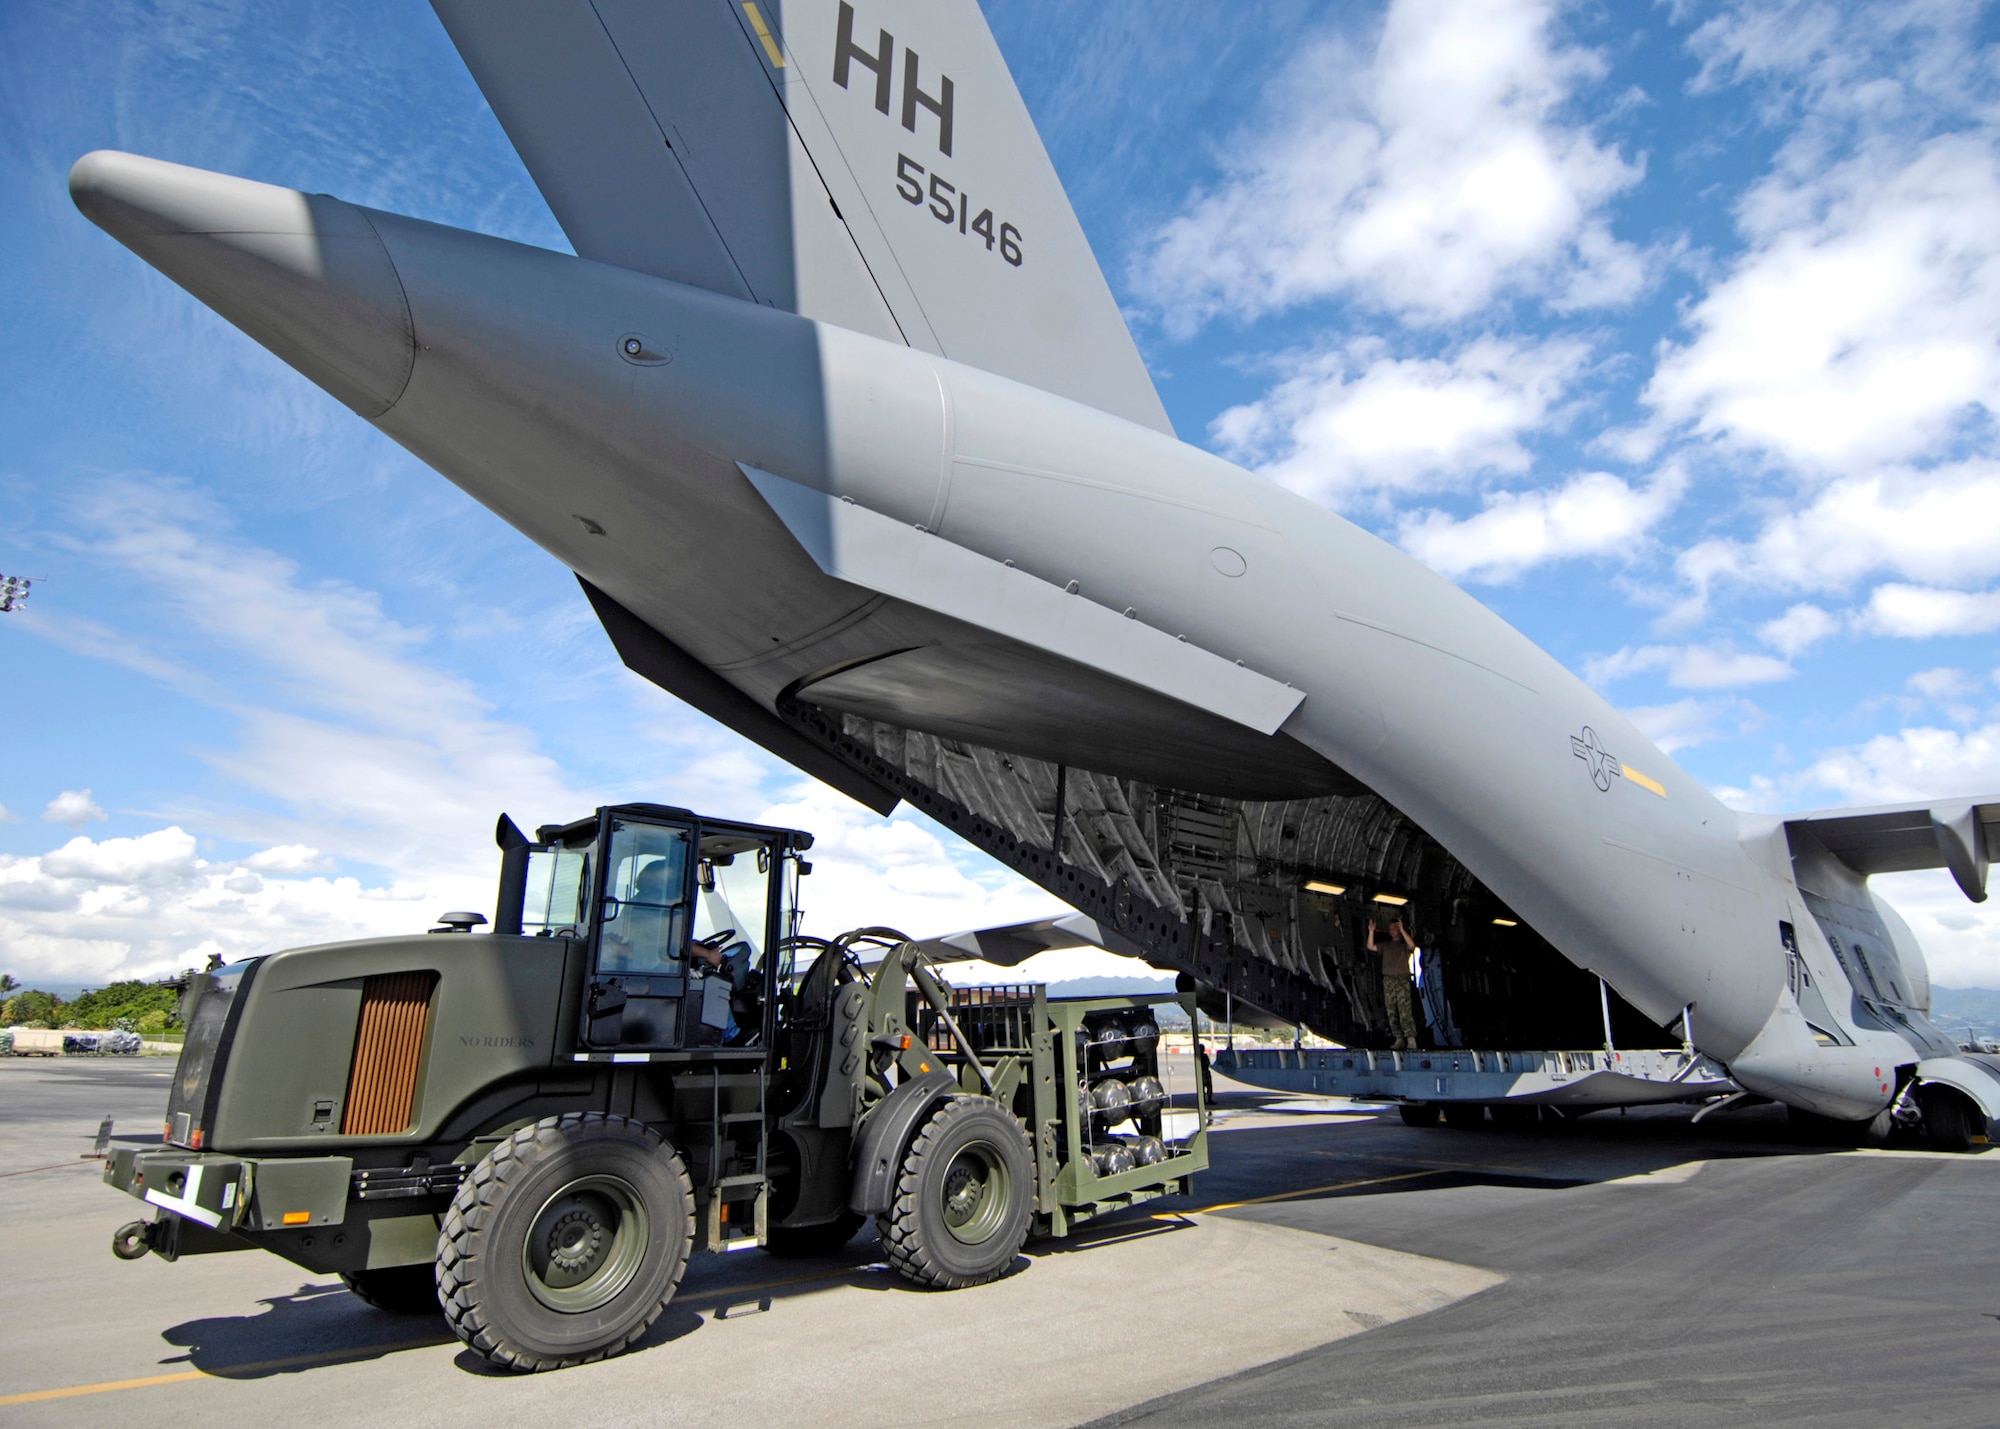 The HydraFLX System is brought up to the back end of a C-17 Globemaster III to demonstrate its mobile capability at Hickam Air Force Base, Hawaii Oct. 18, 2006. The HydraFLX System is being tested by the Air Force as an alternate energy source. It will generate ultra-pure H2 (hydrogen) from water in a flexible pressure management process for fueling buses, tow-tractors, vans, sedans and ground support equipment. The system can also be deployed anywhere and operate in hostile theaters without infrastructure or pipelines. (U.S. Air Force photo/Tech. Sgt. Shane A. Cuomo)
